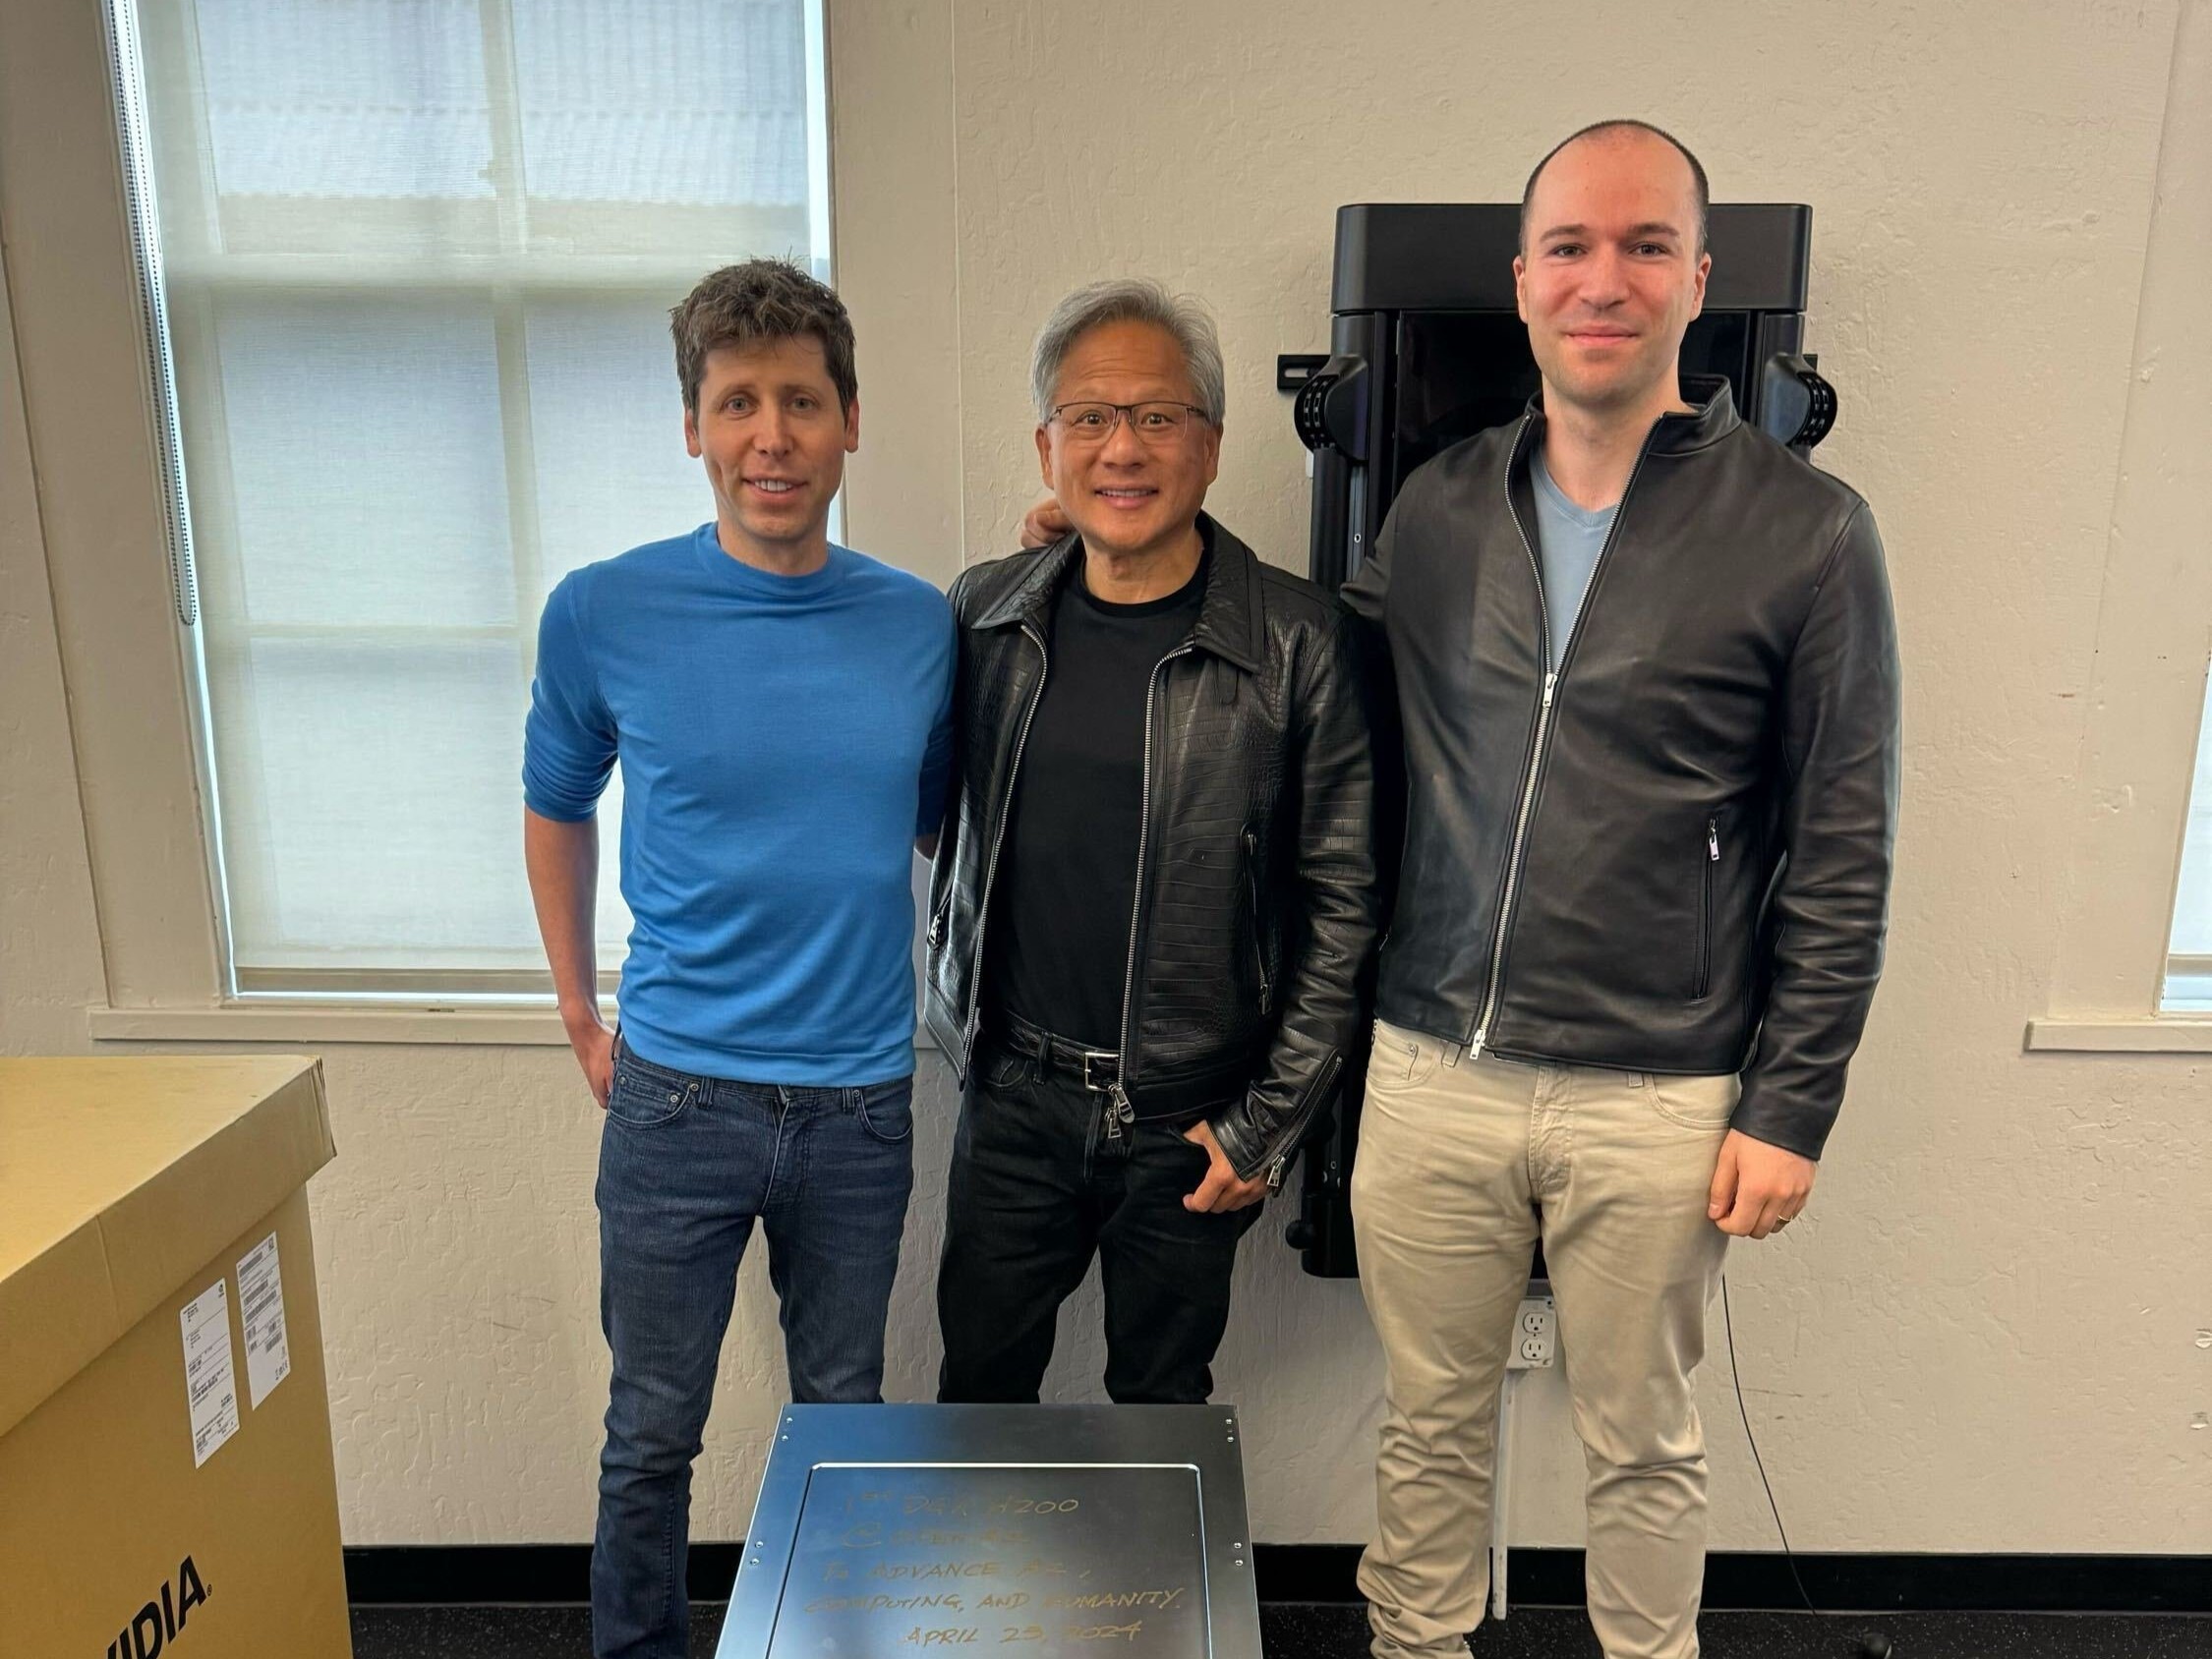 NVIDIA CEO personally brought the first DGX H200 AI accelerators to OpenAI's offices